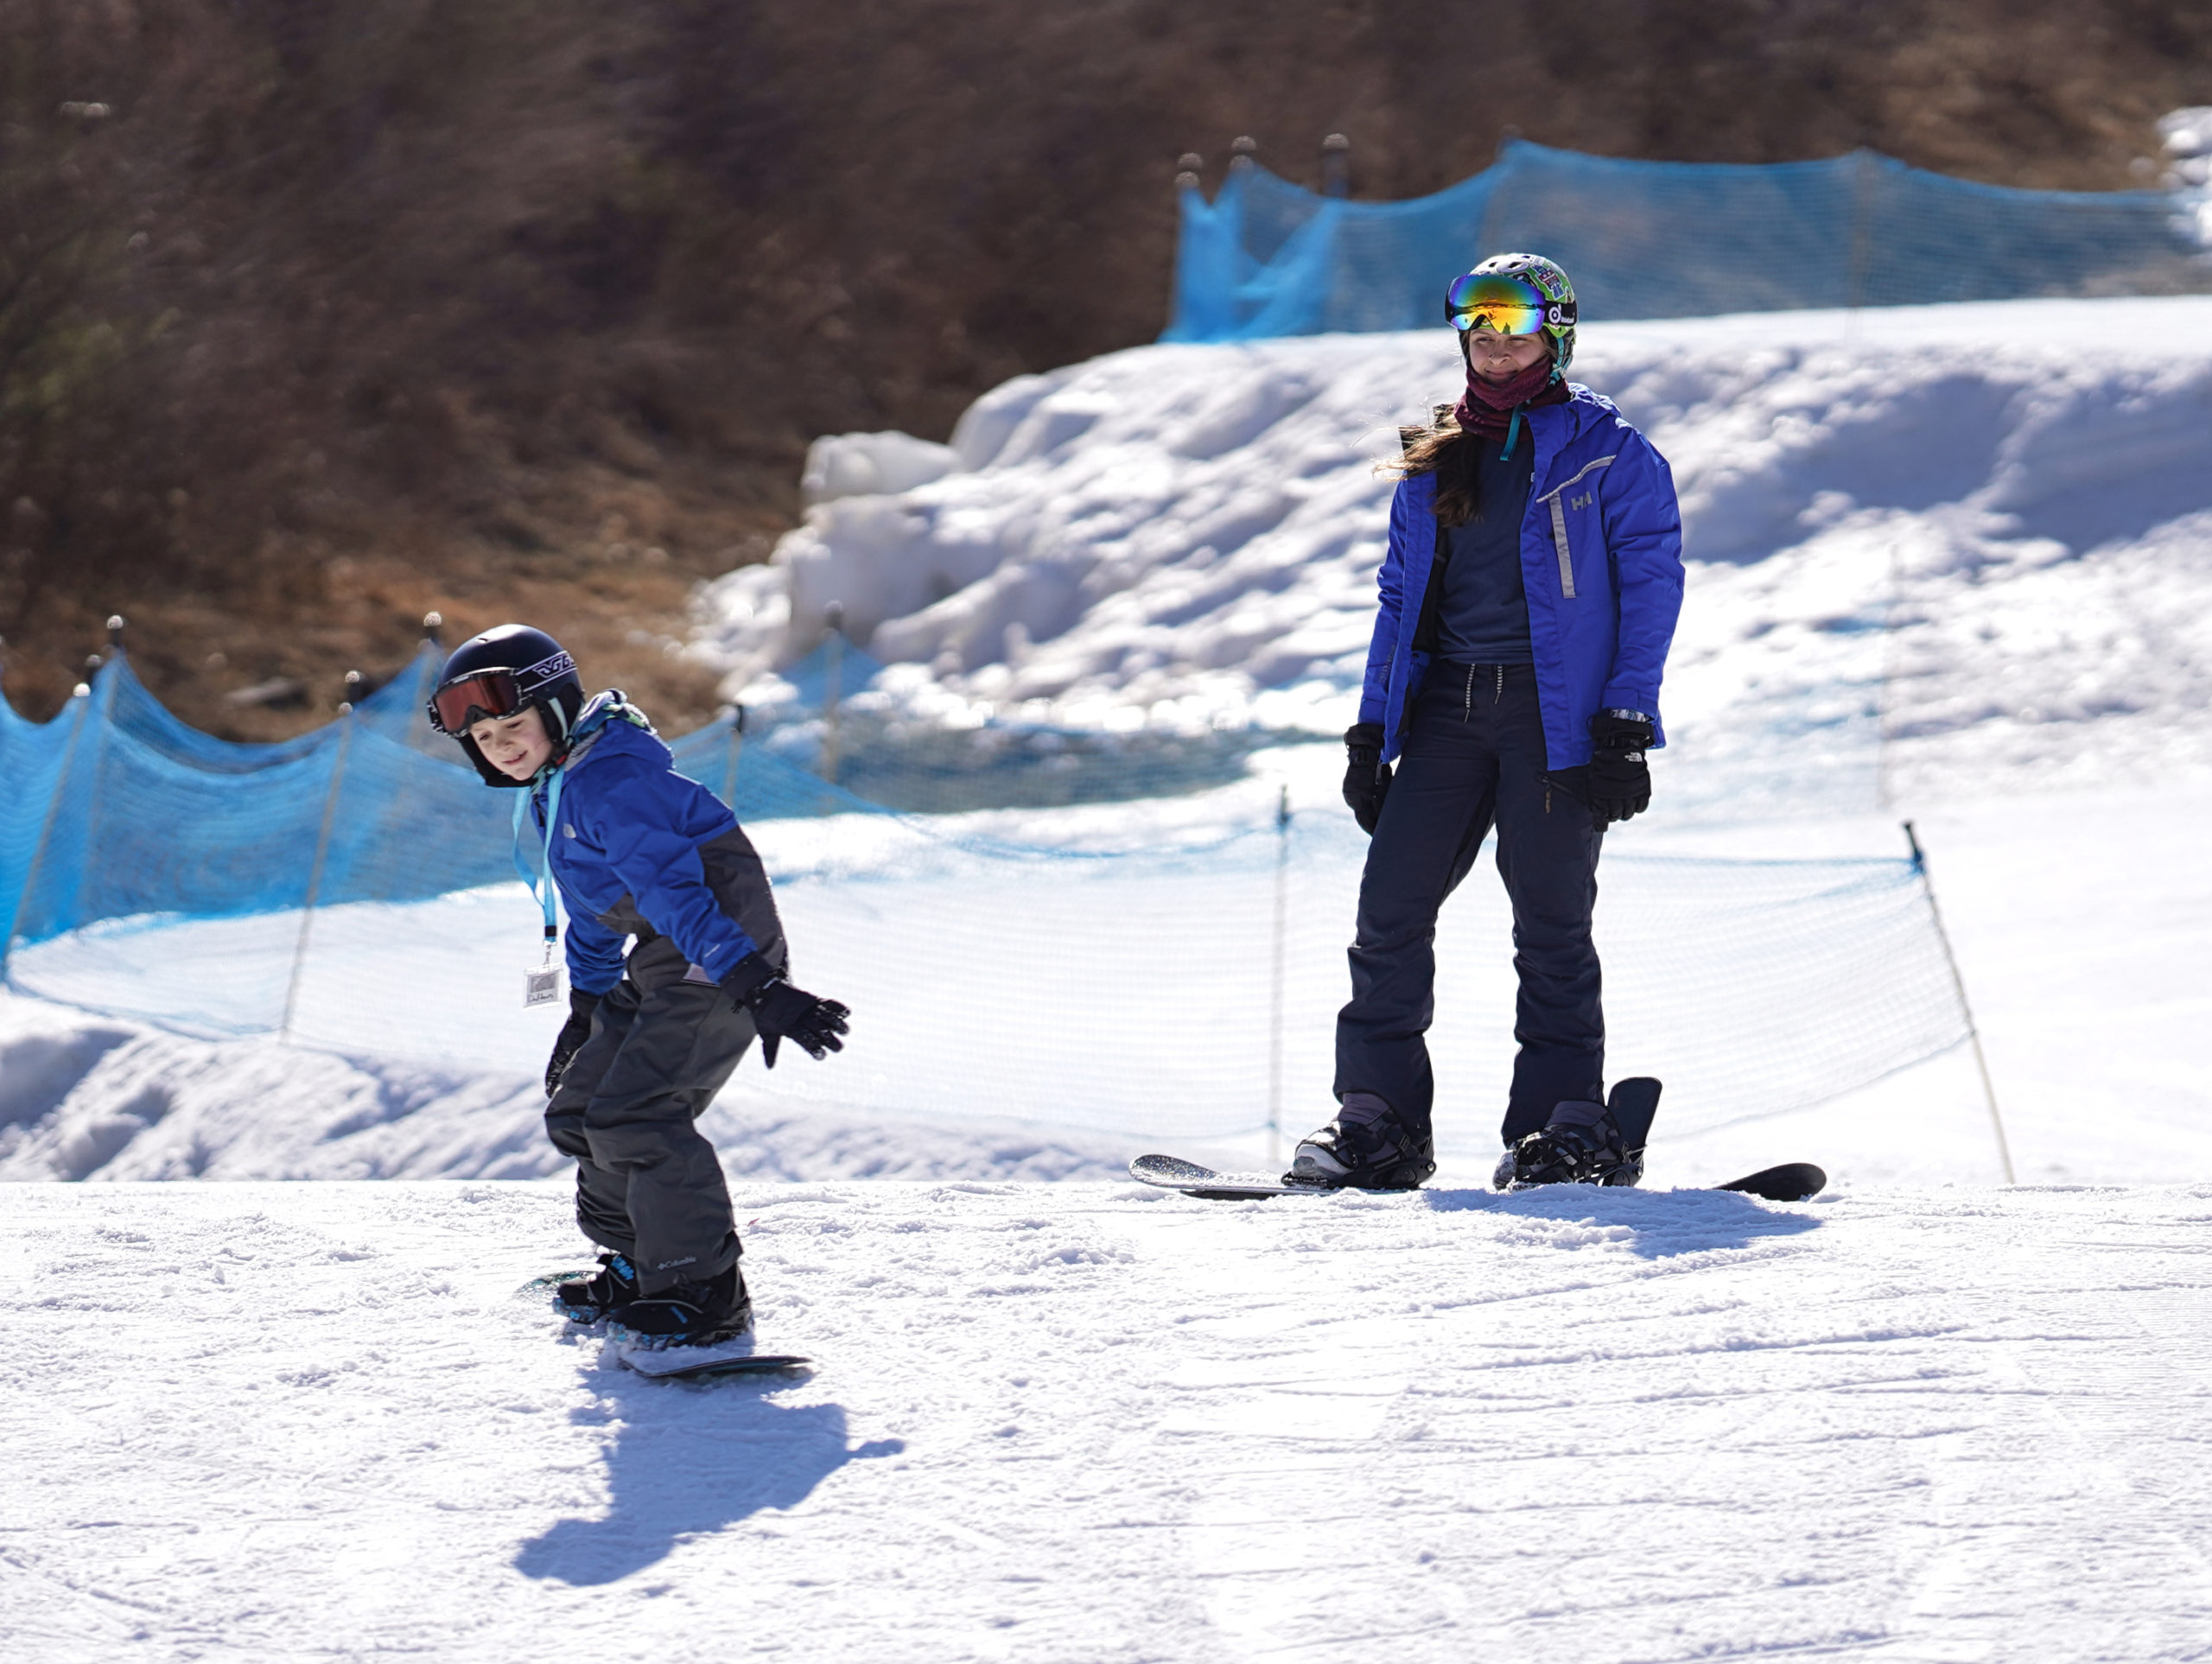 Snowboard lesson at Blue Mountain